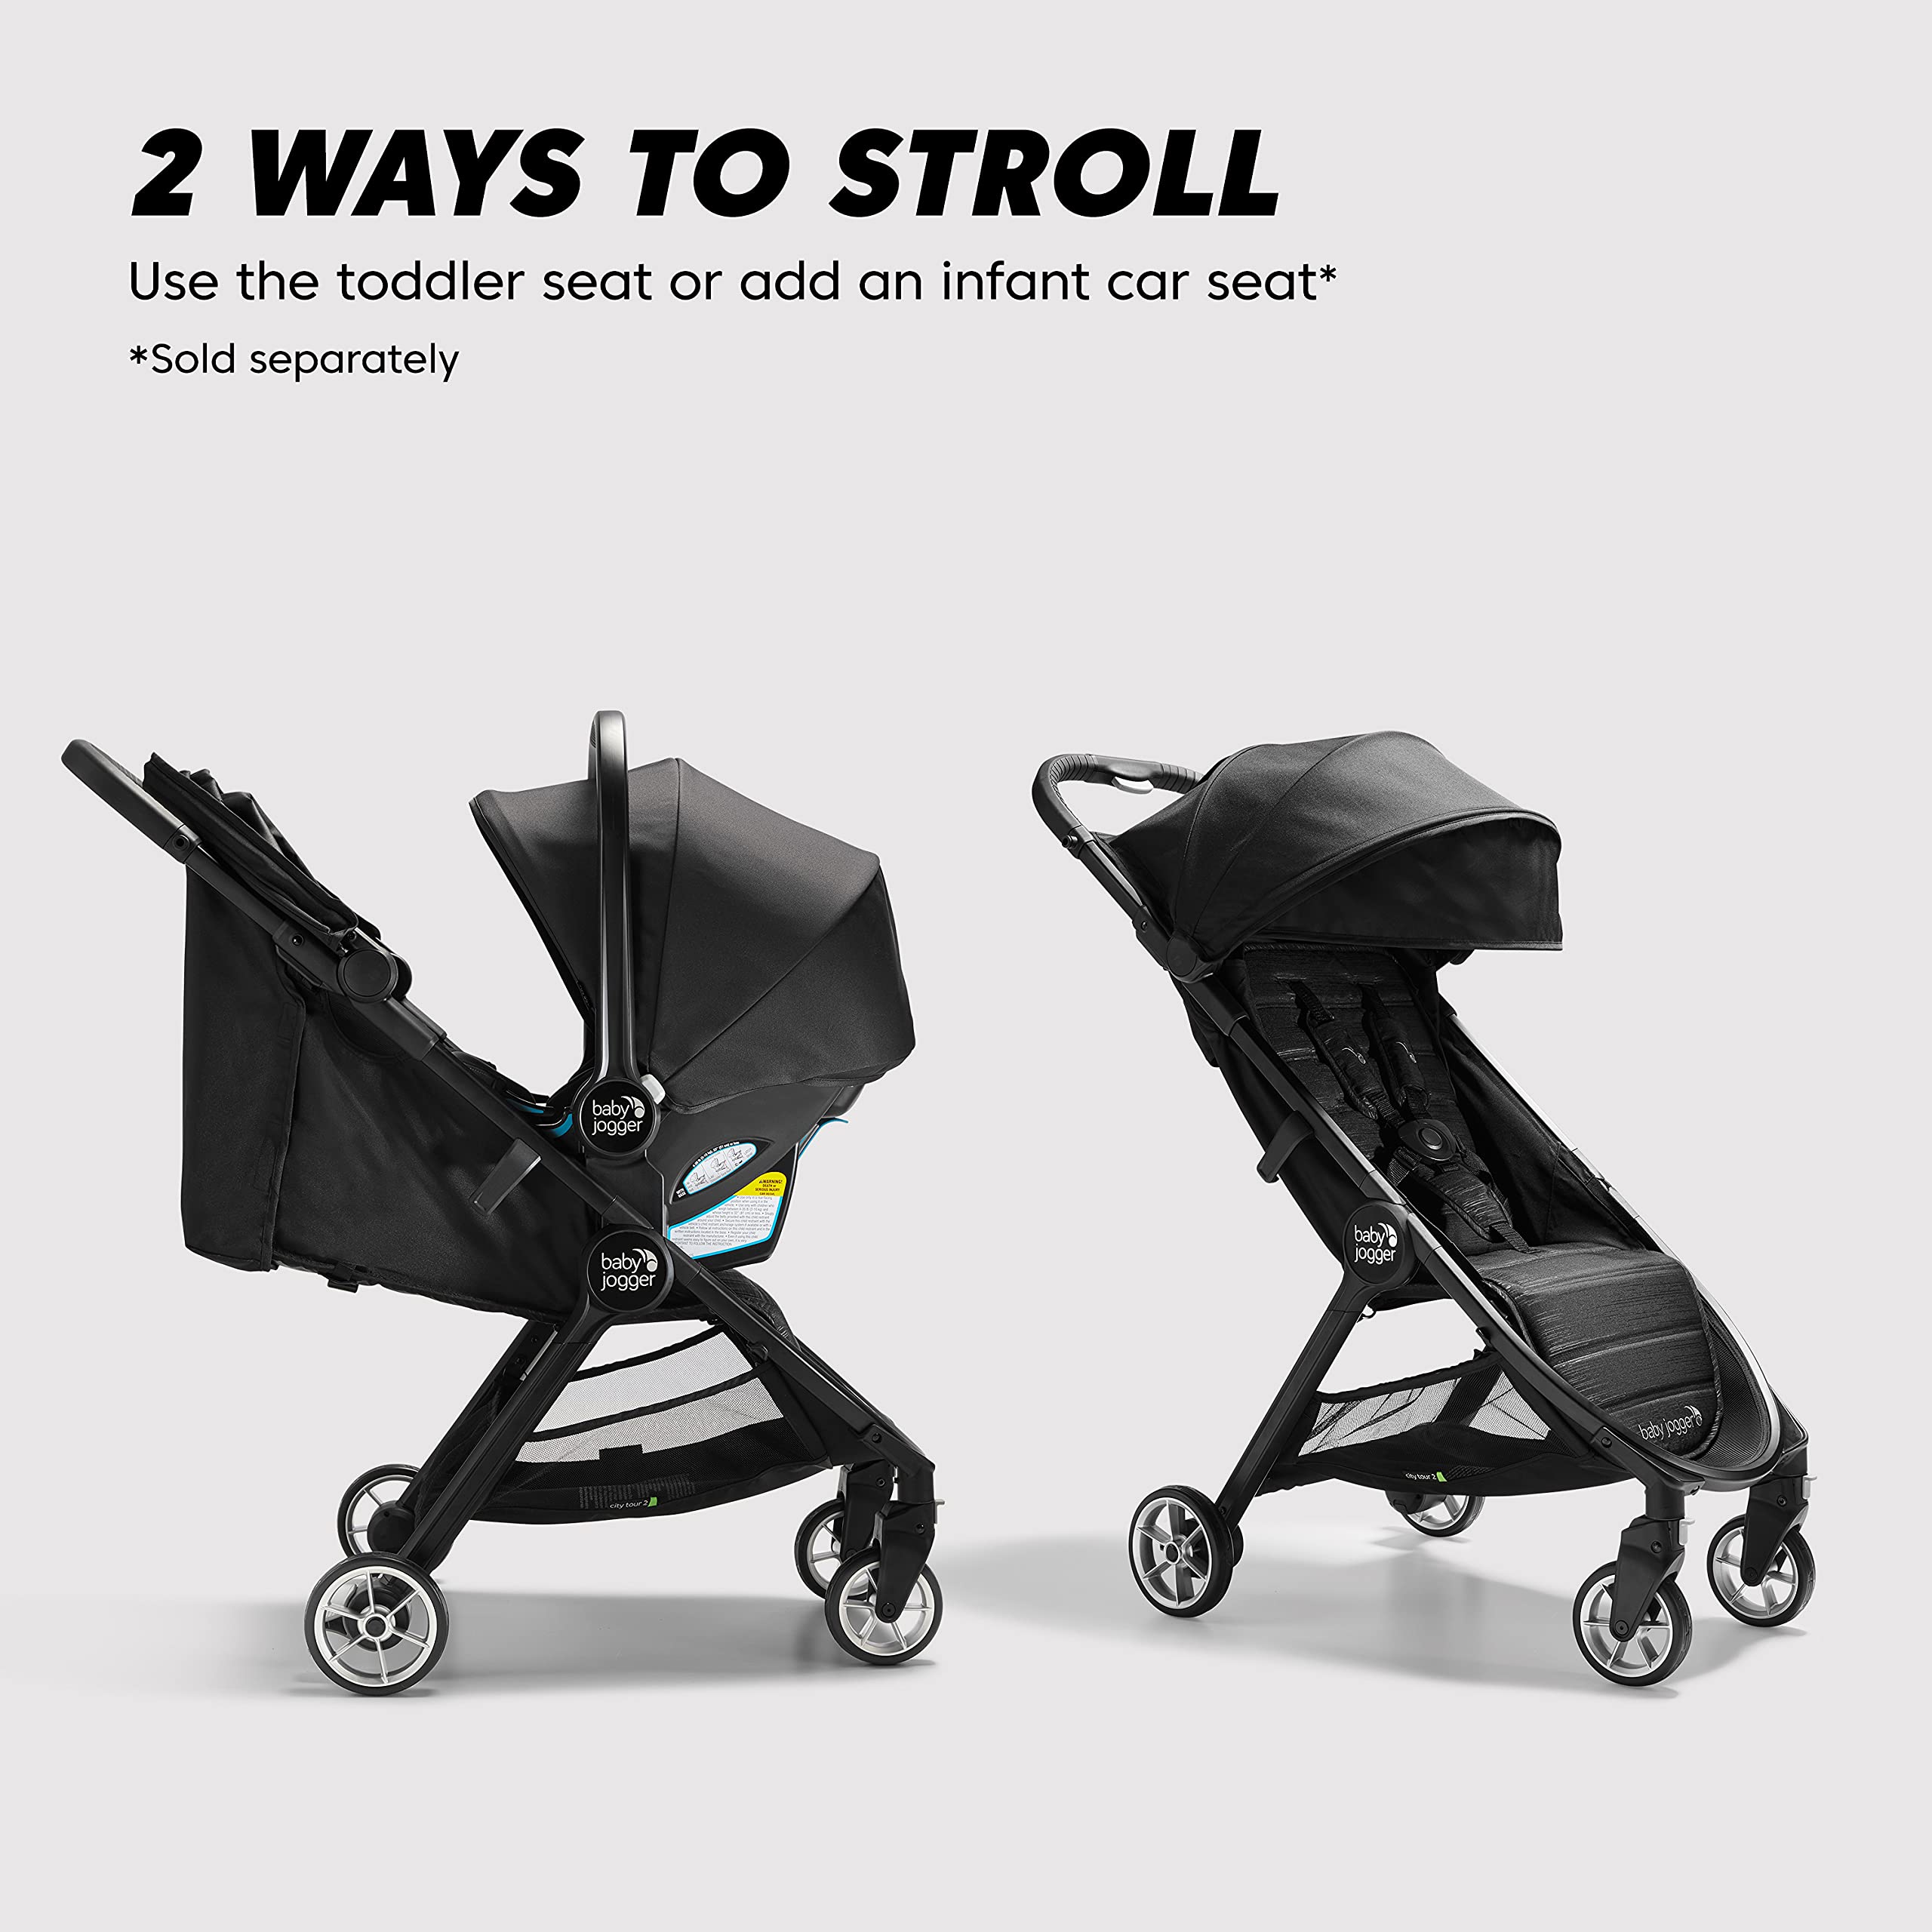 Baby Jogger City Tour 2 Ultra-Compact Travel Stroller, Jet